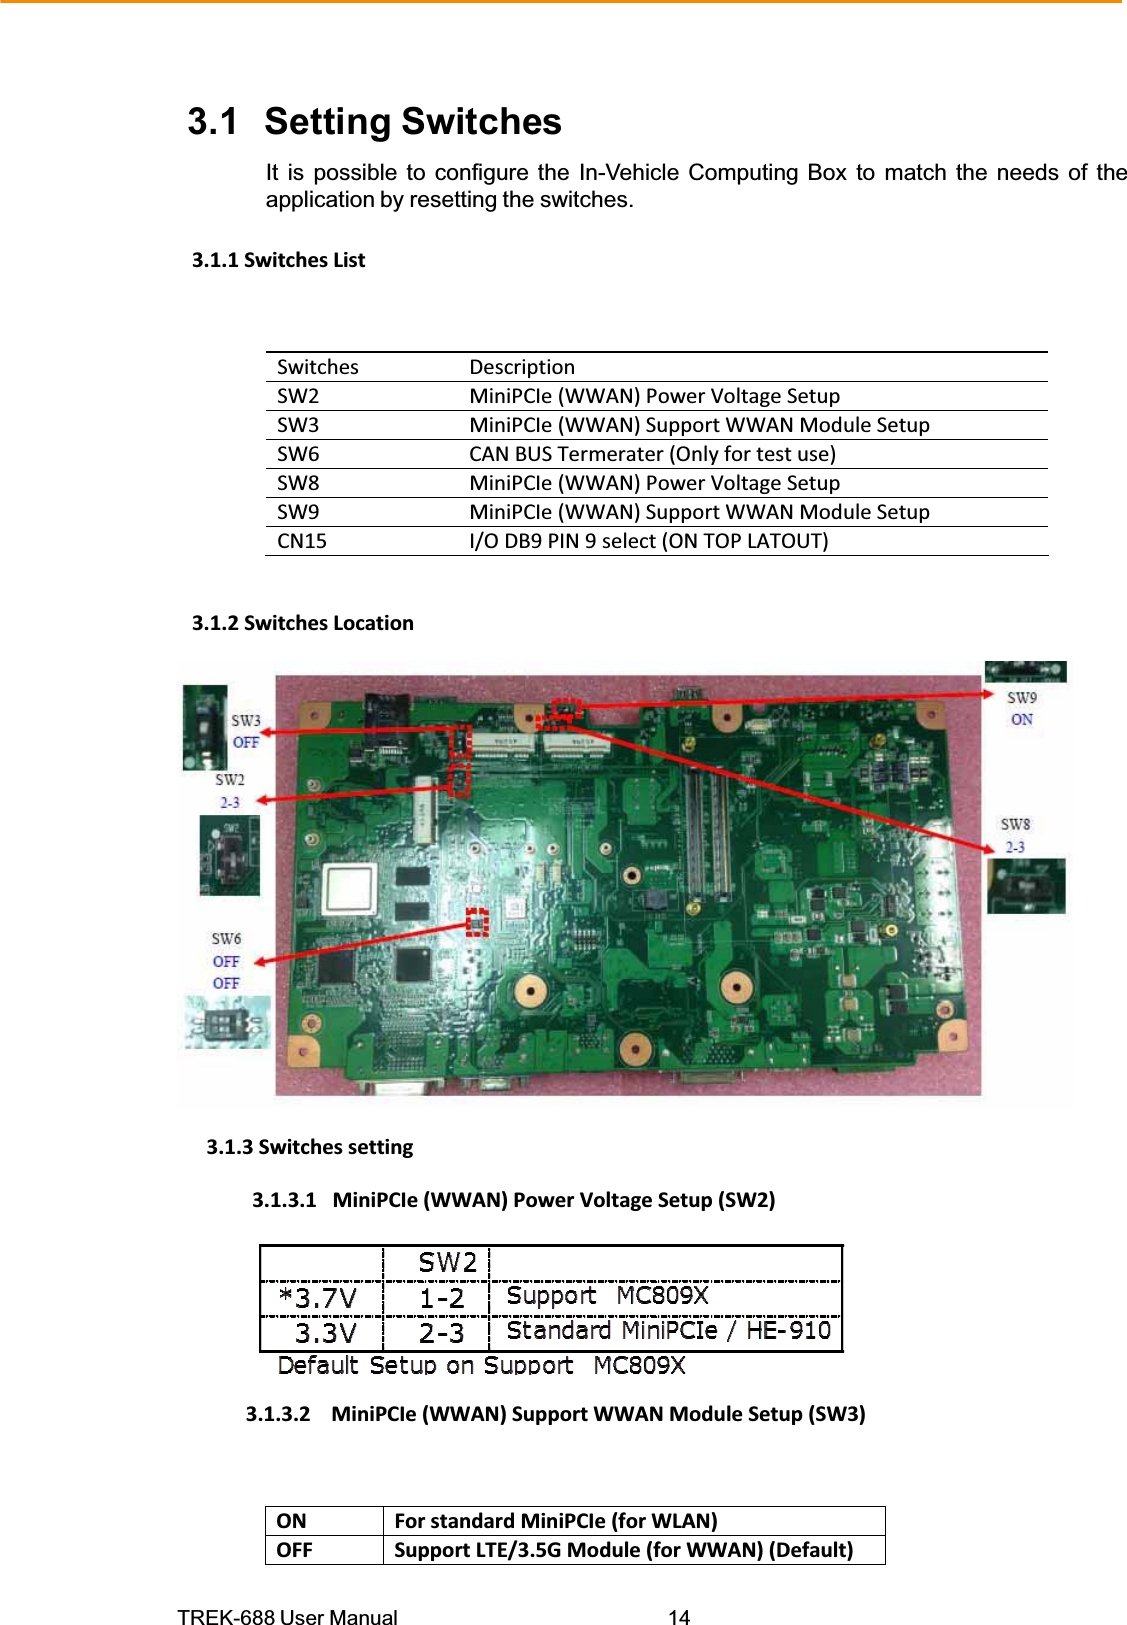 TREK-688 User Manual  143.1 Setting Switches It is possible to configure the In-Vehicle Computing Box to match the needs of the application by resetting the switches. 3.1.1SwitchesListSwitches DescriptionSW2 MiniPCIe(WWAN)PowerVoltageSetupSW3 MiniPCIe(WWAN)SupportWWANModuleSetupSW6 CANBUSTermerater(Onlyfortestuse)SW8 MiniPCIe(WWAN)PowerVoltageSetupSW9 MiniPCIe(WWAN)SupportWWANModuleSetupCN15 I/ODB9PIN9select(ONTOPLATOUT)3.1.2SwitchesLocation3.1.3Switchessetting3.1.3.1MiniPCIe(WWAN)PowerVoltageSetup(SW2) 3.1.3.2MiniPCIe(WWAN)SupportWWANModuleSetup(SW3) ON ForstandardMiniPCIe(forWLAN)OFF SupportLTE/3.5GModule(forWWAN)(Default)